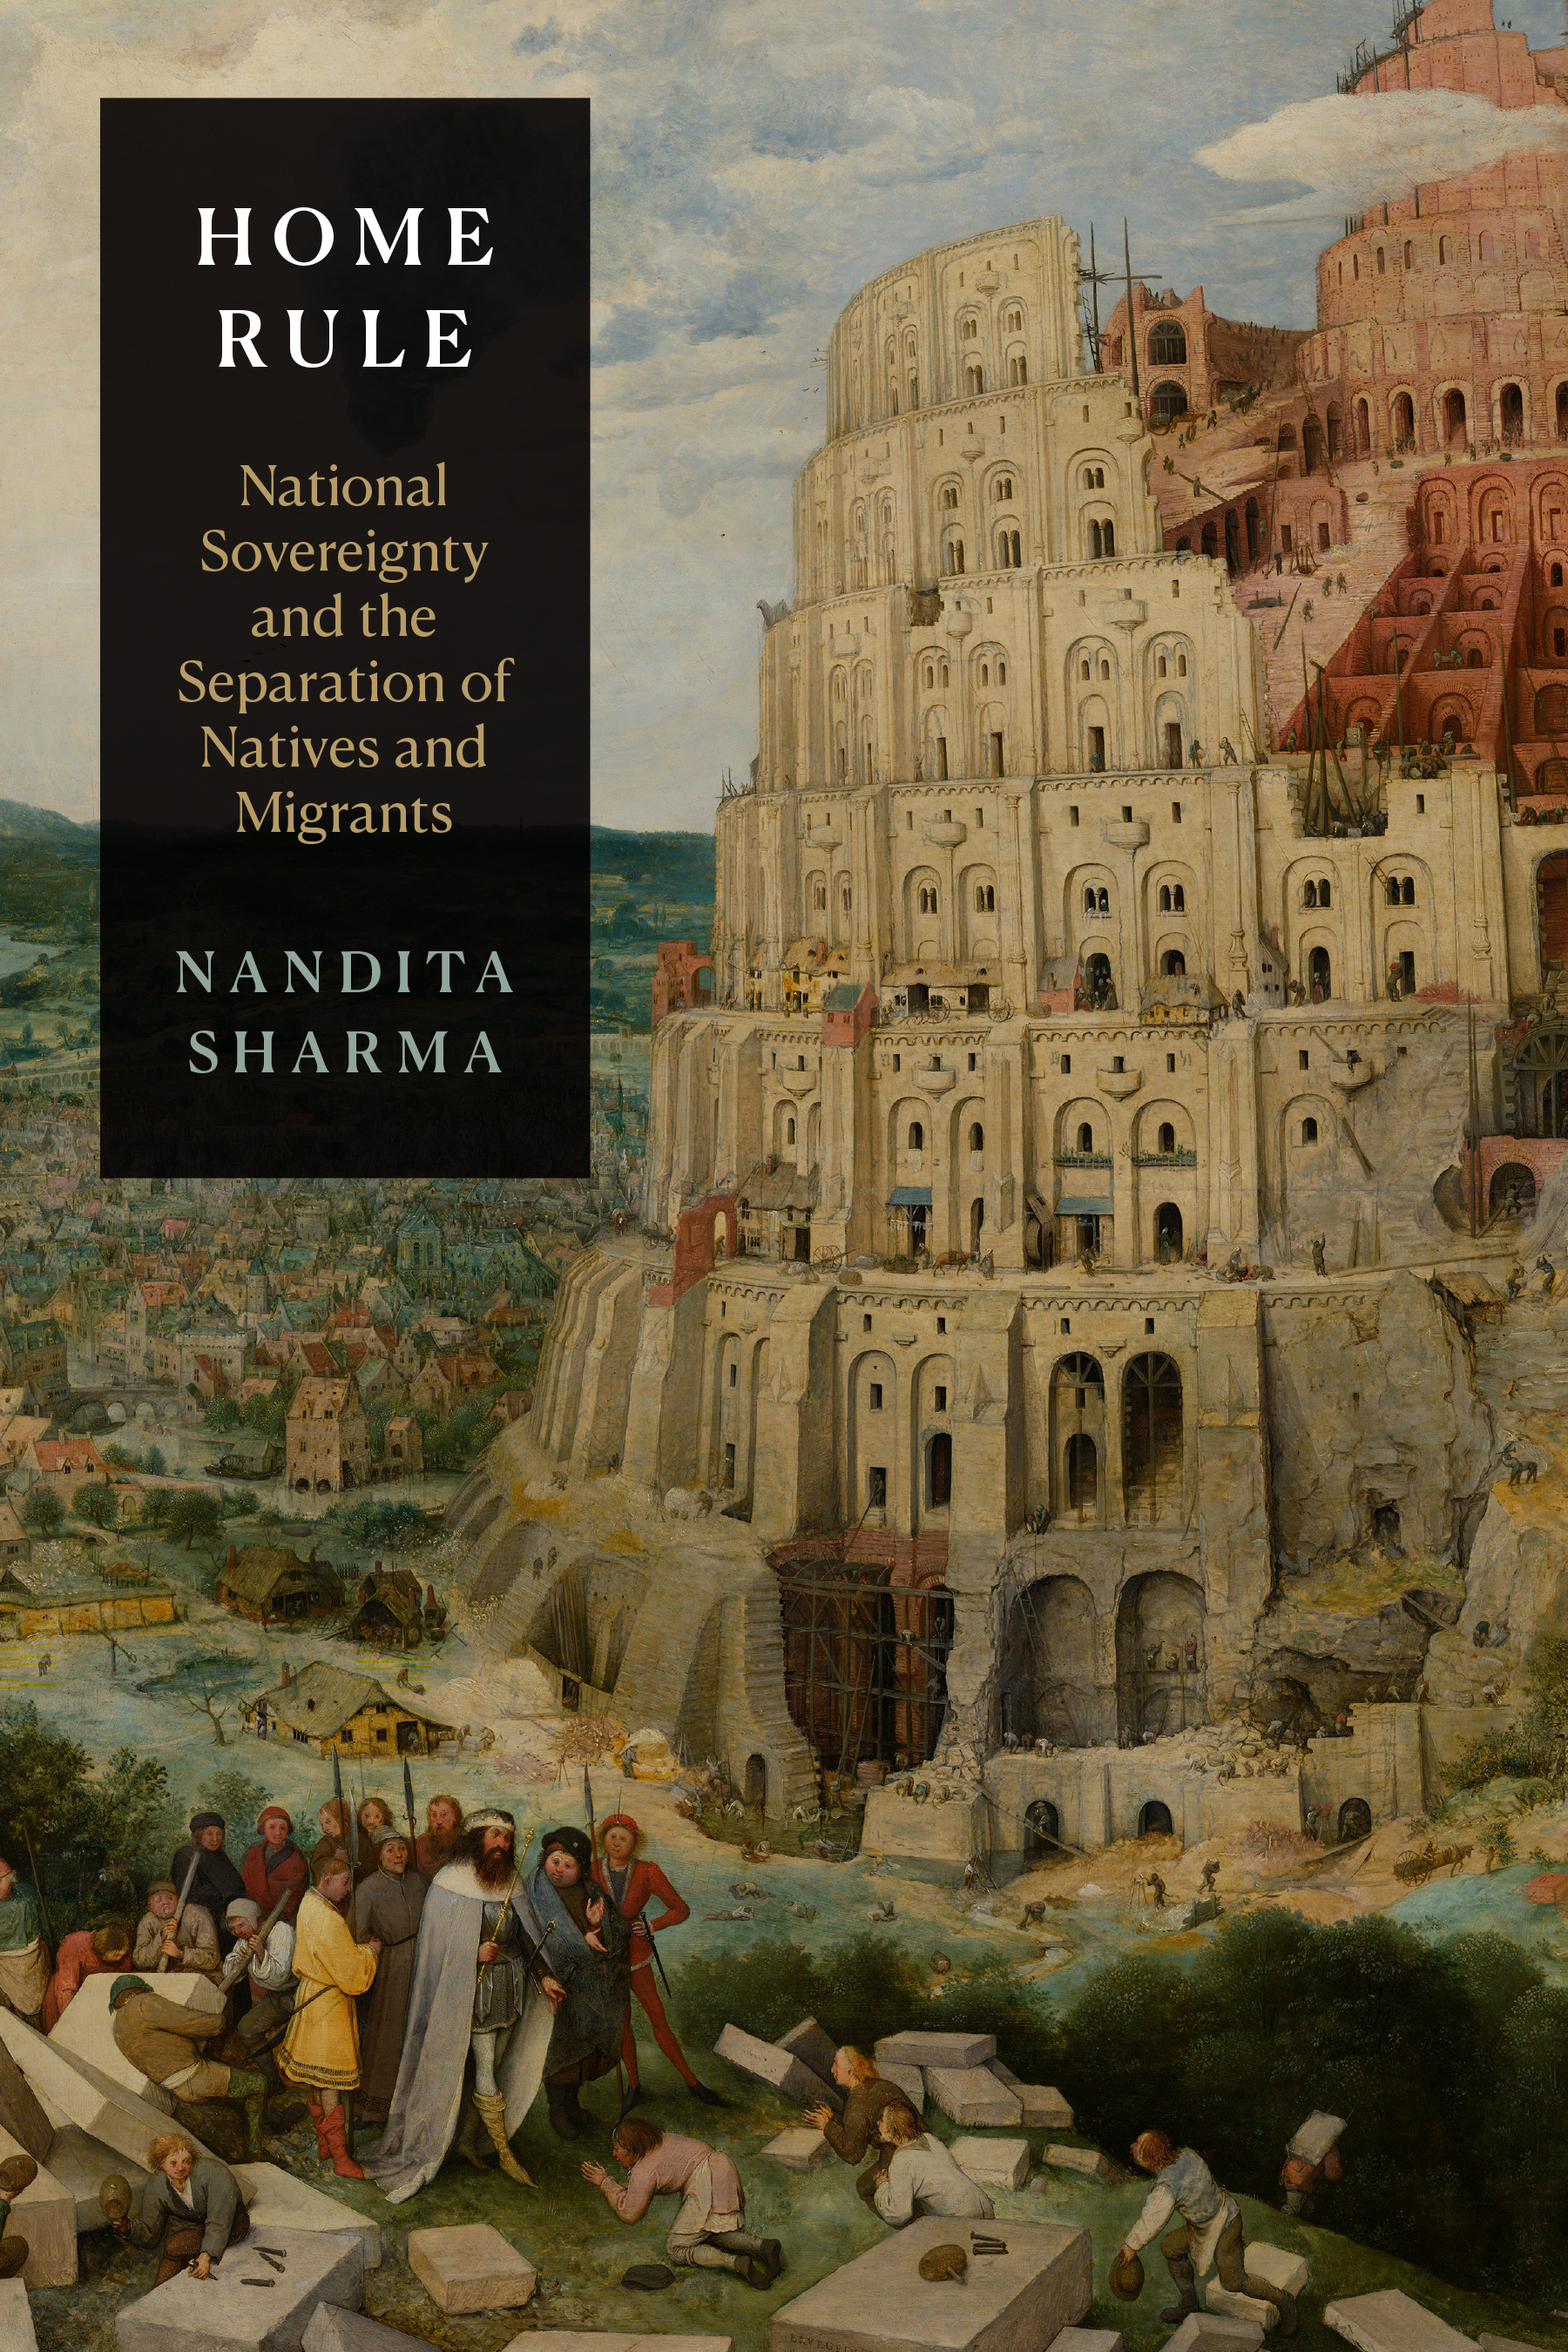 oil painting of Pieter Bruegel the Elder at the Tower of Babel, 1563, book cover of "Home Rule: National Sovereignty and the Separation of Natives and Migrants" by Nandita Sharma